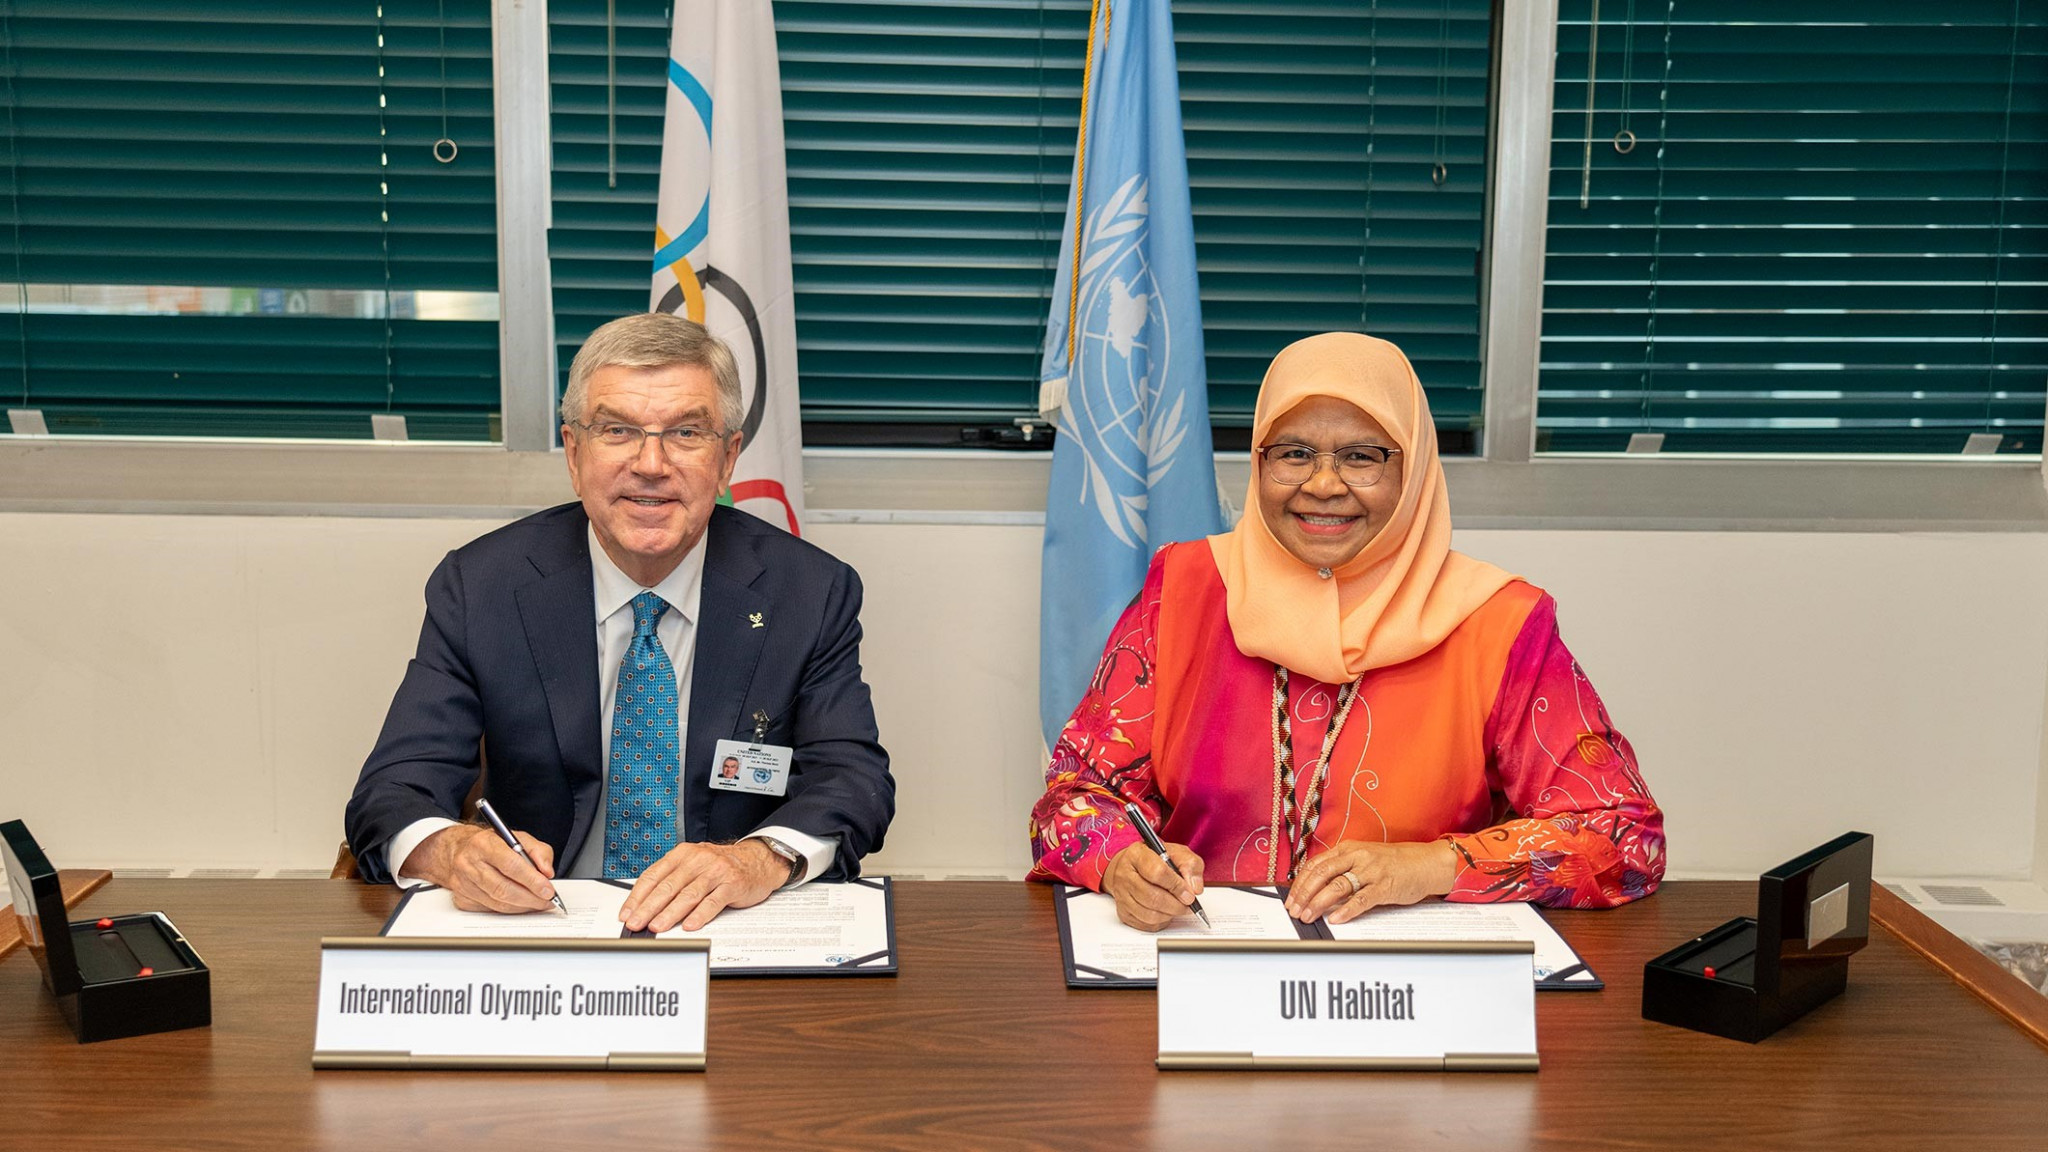 IOC signs agreement with UN-Habitat to promote sport in urban environments